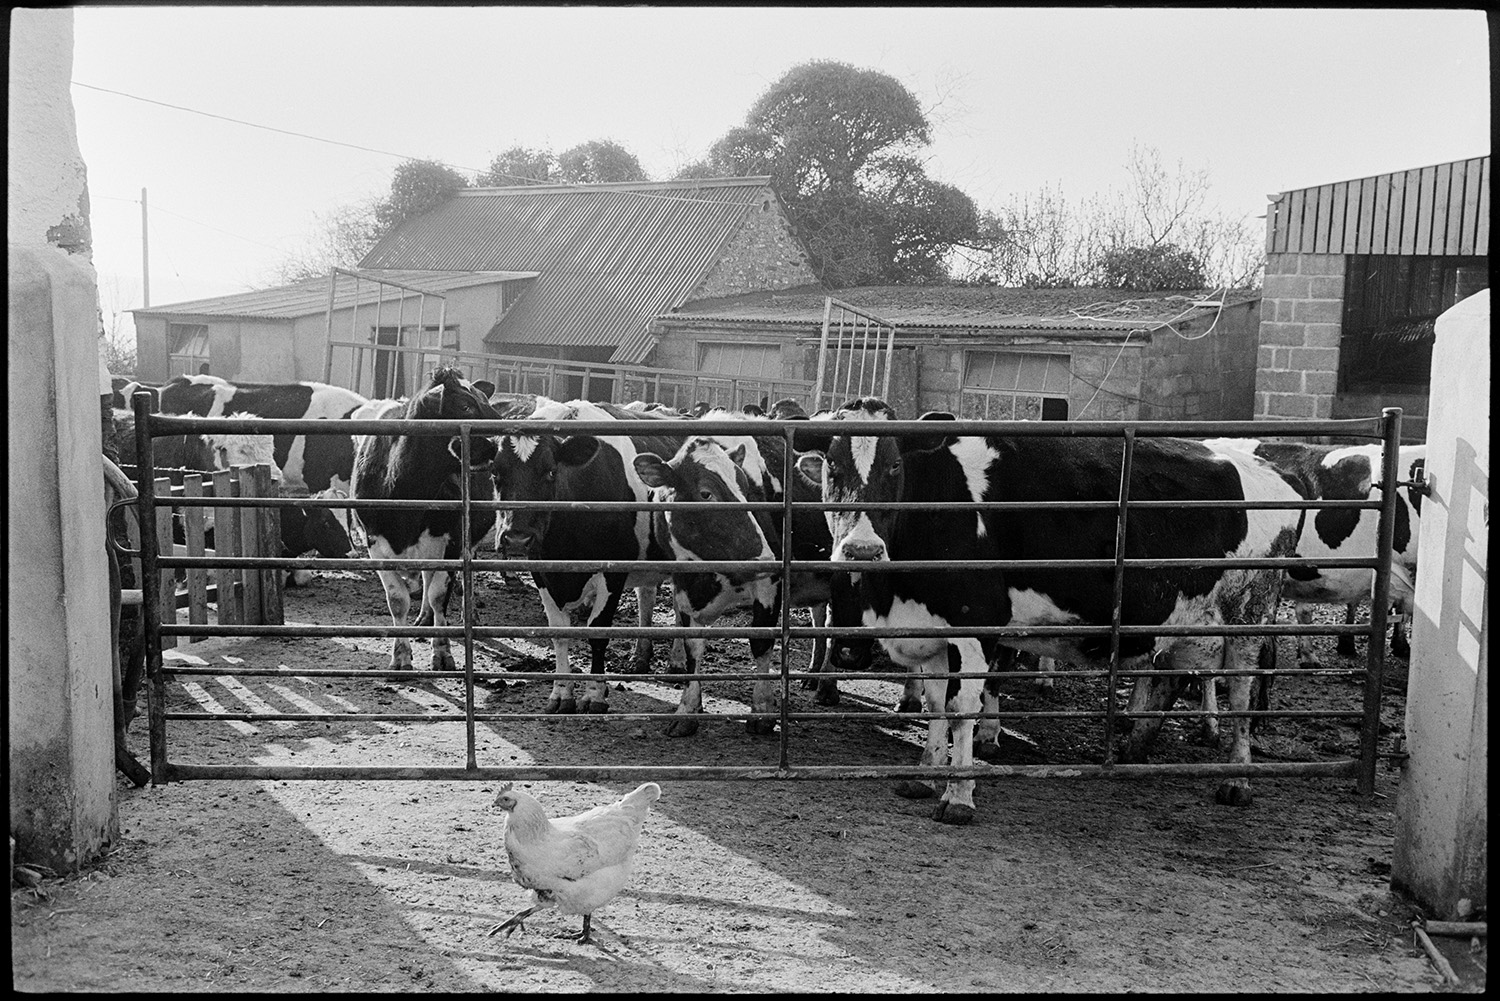 Milking herd of cows, farmyard chicken. 
[A chicken walking past a metal gate in the farmyard at Upcott, Dolton. A herd of dairy cows can be seen behind the gate and barns are visible in the background.]